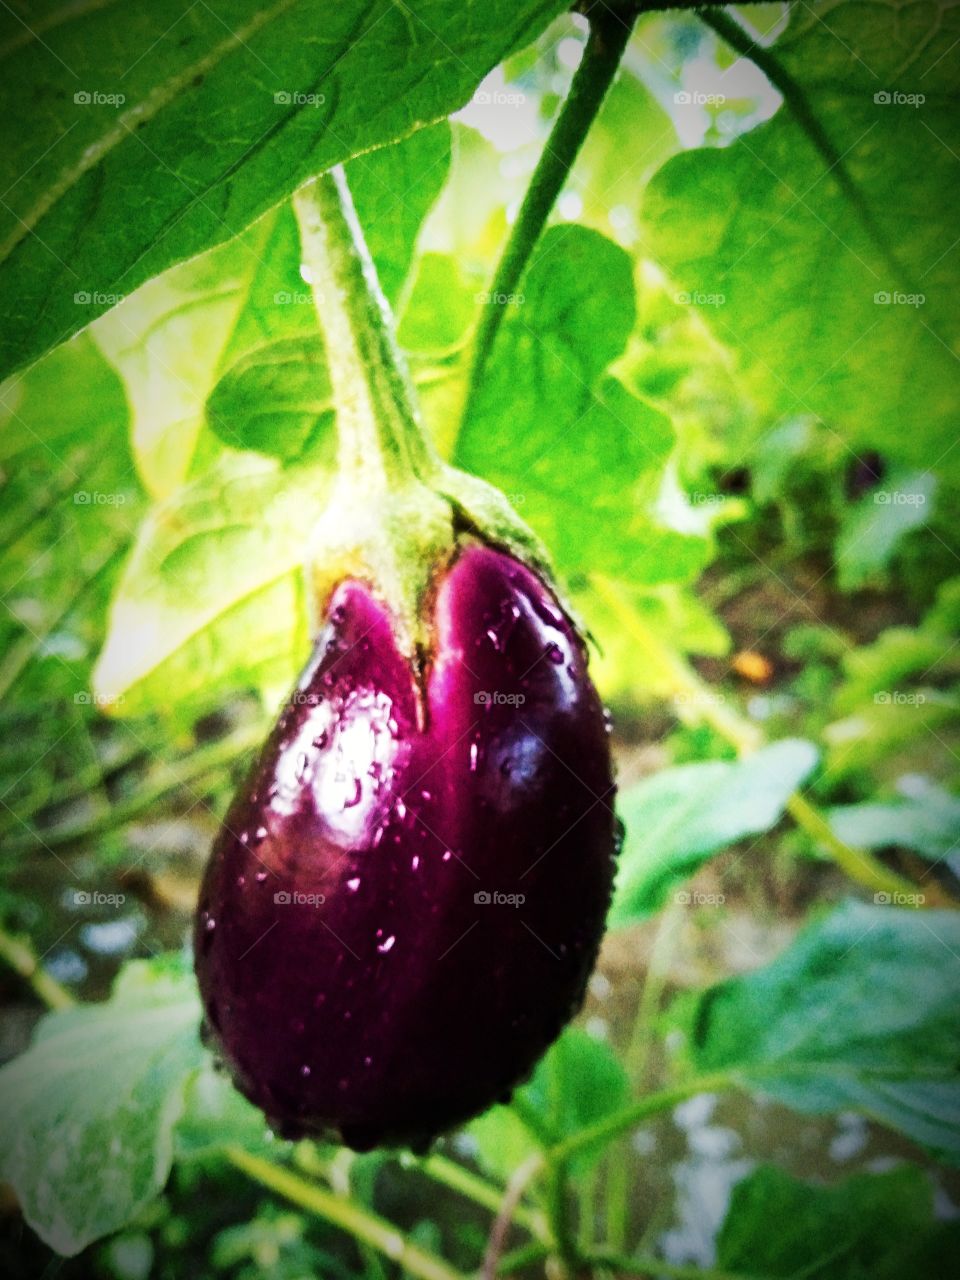 A Very Beautiful Brinjal Vegetable, Capture After Raining.